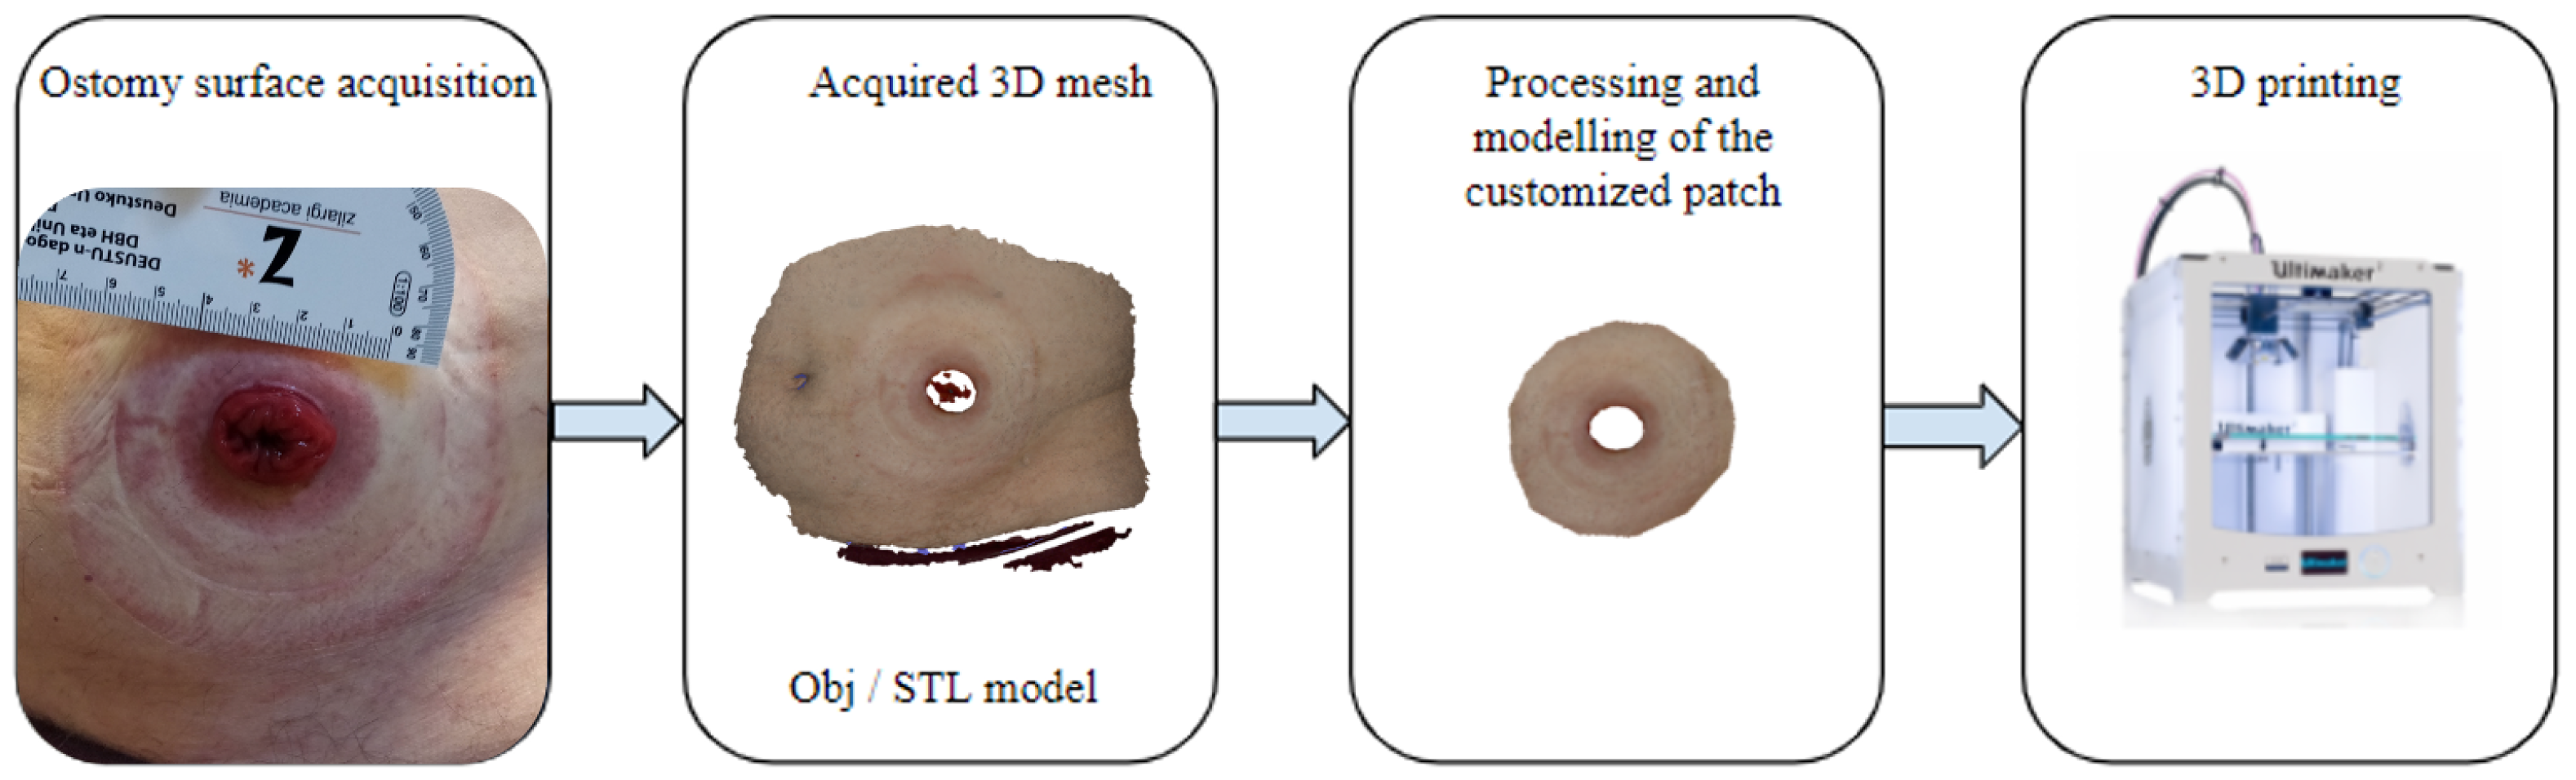 Odapt, a 3D Printed Disc for Ostomy Bags That Does Not Cause